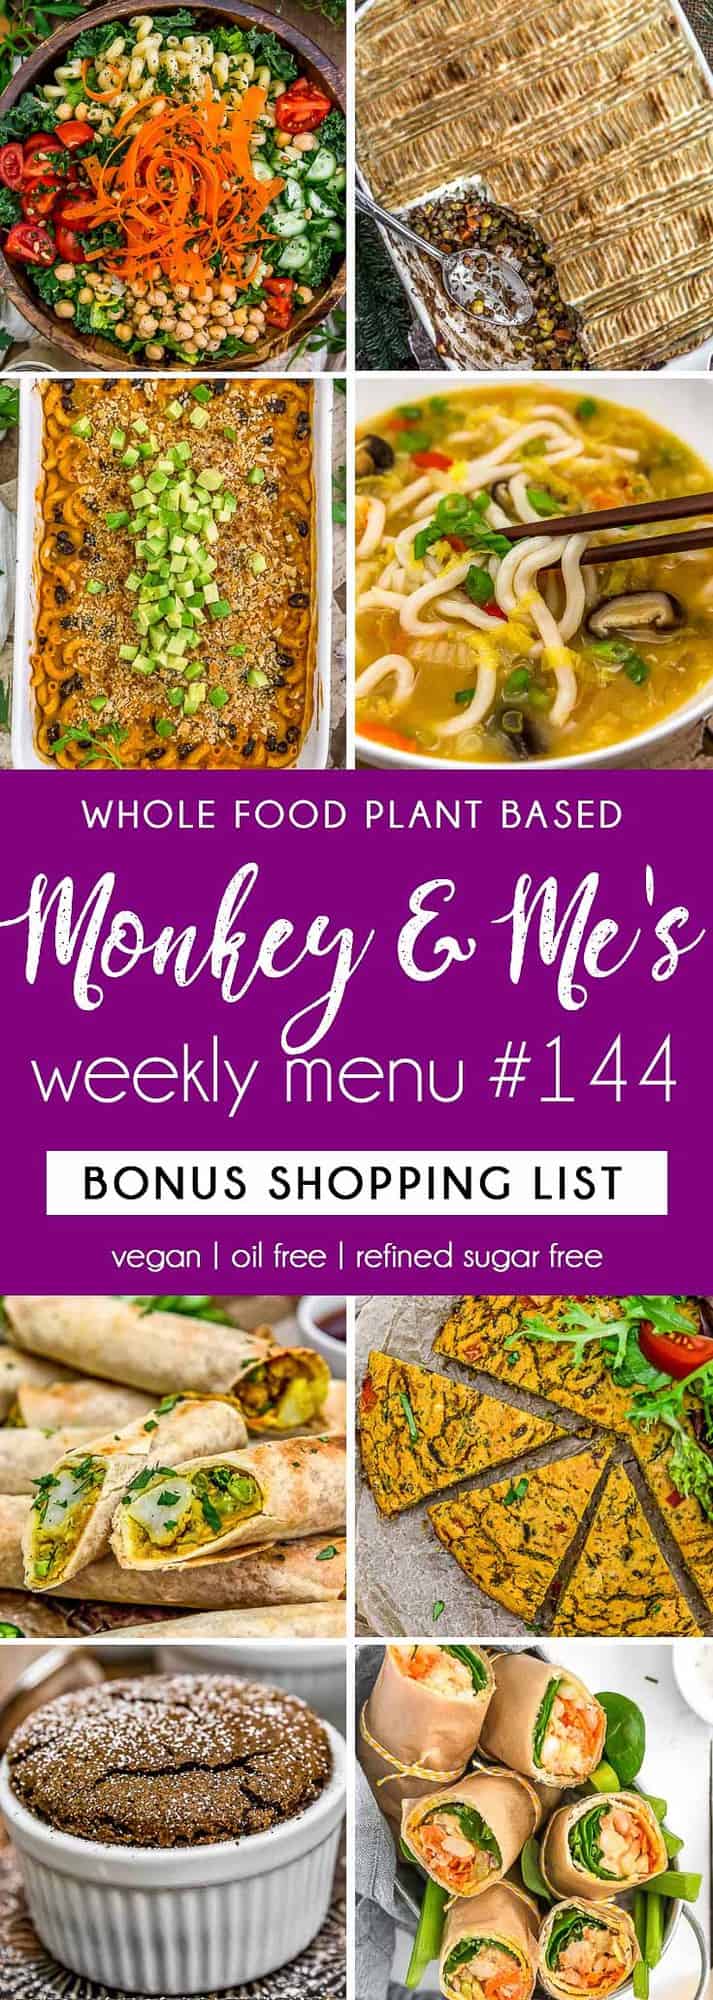 Monkey and Me's Menu 144 featuring 8 recipes